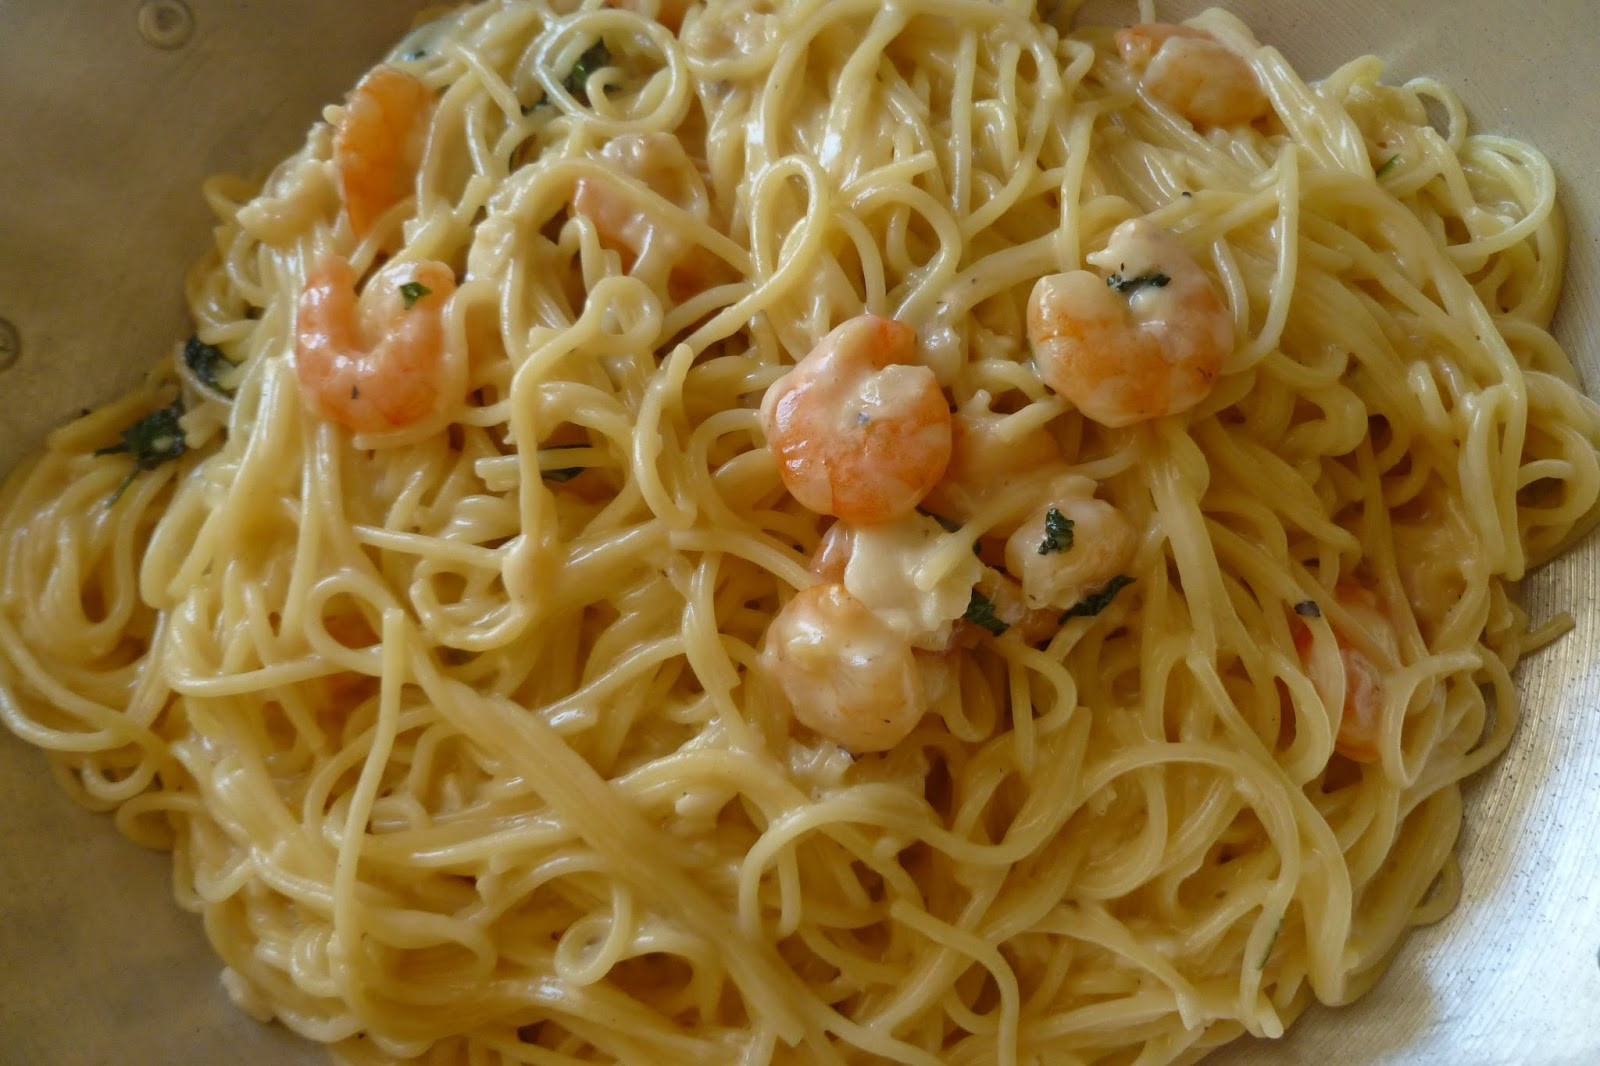 Garlic Noodles With Shrimp
 The Pastry Chef s Baking Parmesan Garlic Noodles with Shrimp